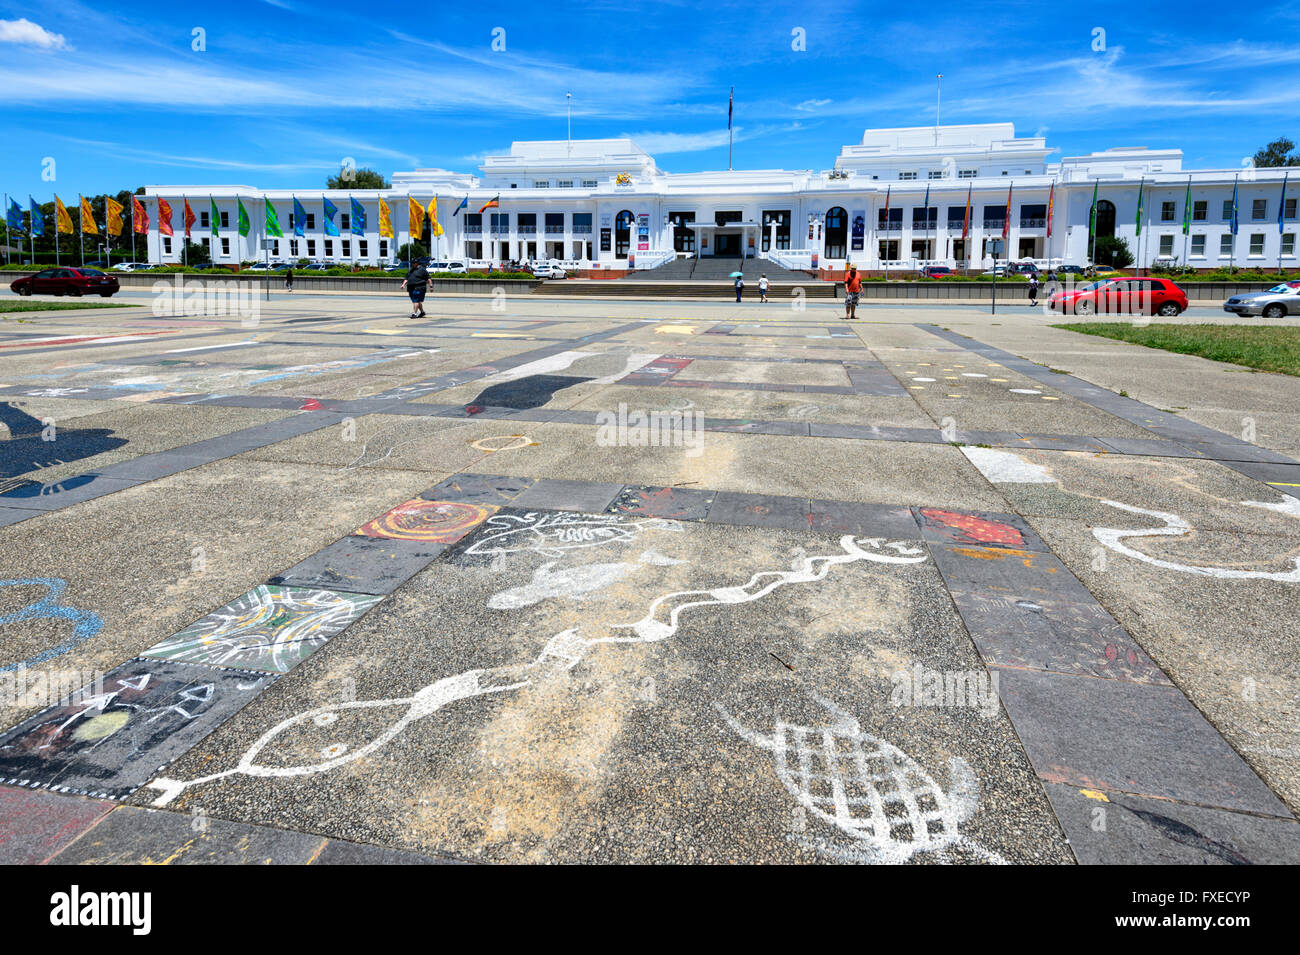 Canberra Old Parliament House, with Aboriginal Paintings on the Pavement, Australia Capital Territory, ACT, Australia Stock Photo